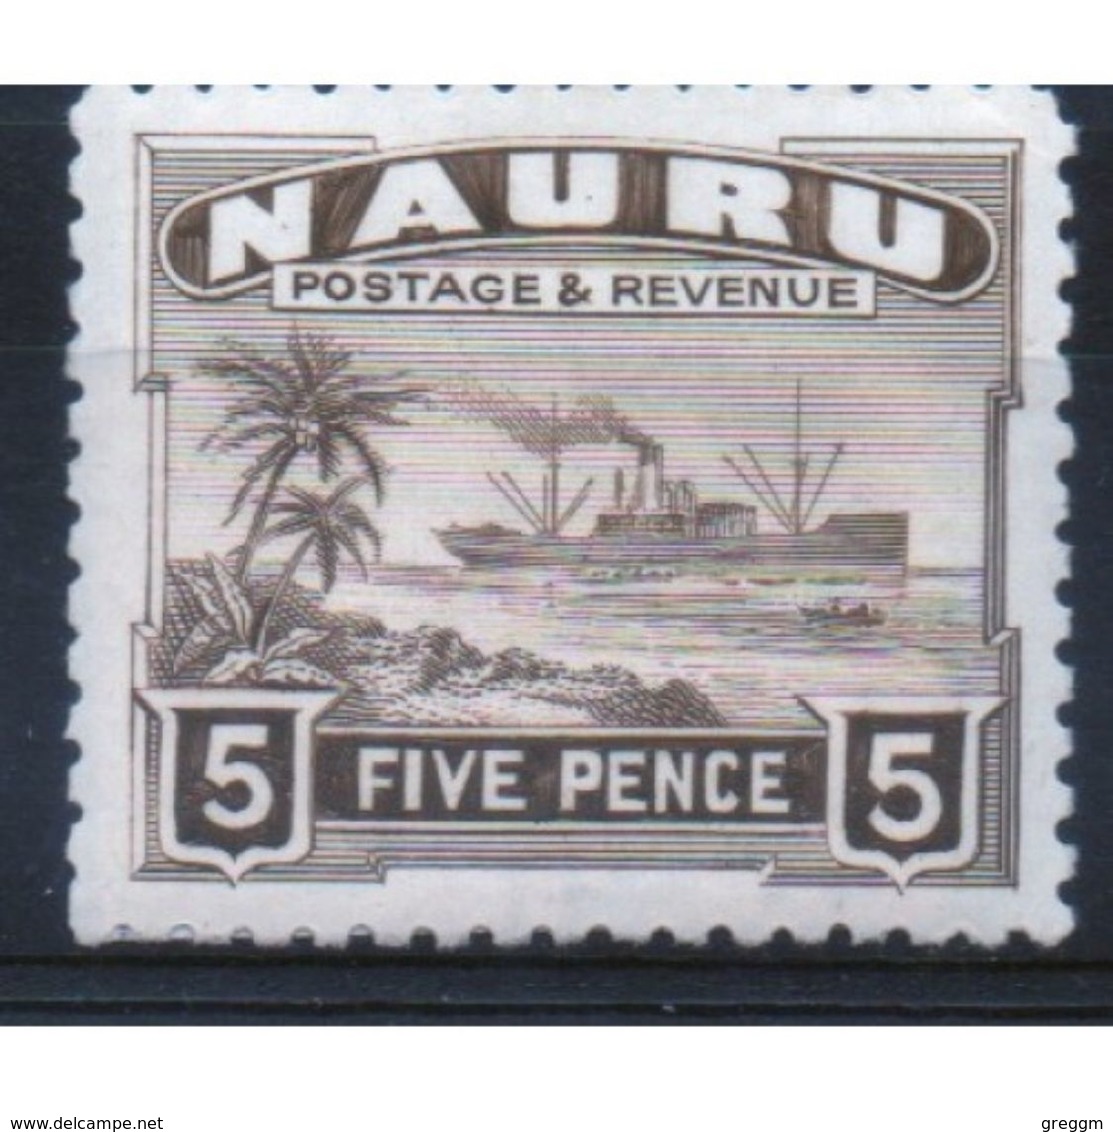 Nauru 5d Definitive Stamp From 1924.  This Stamp Is Catalogue Number 33b And Is In Mounted Mint Condition. - Nauru